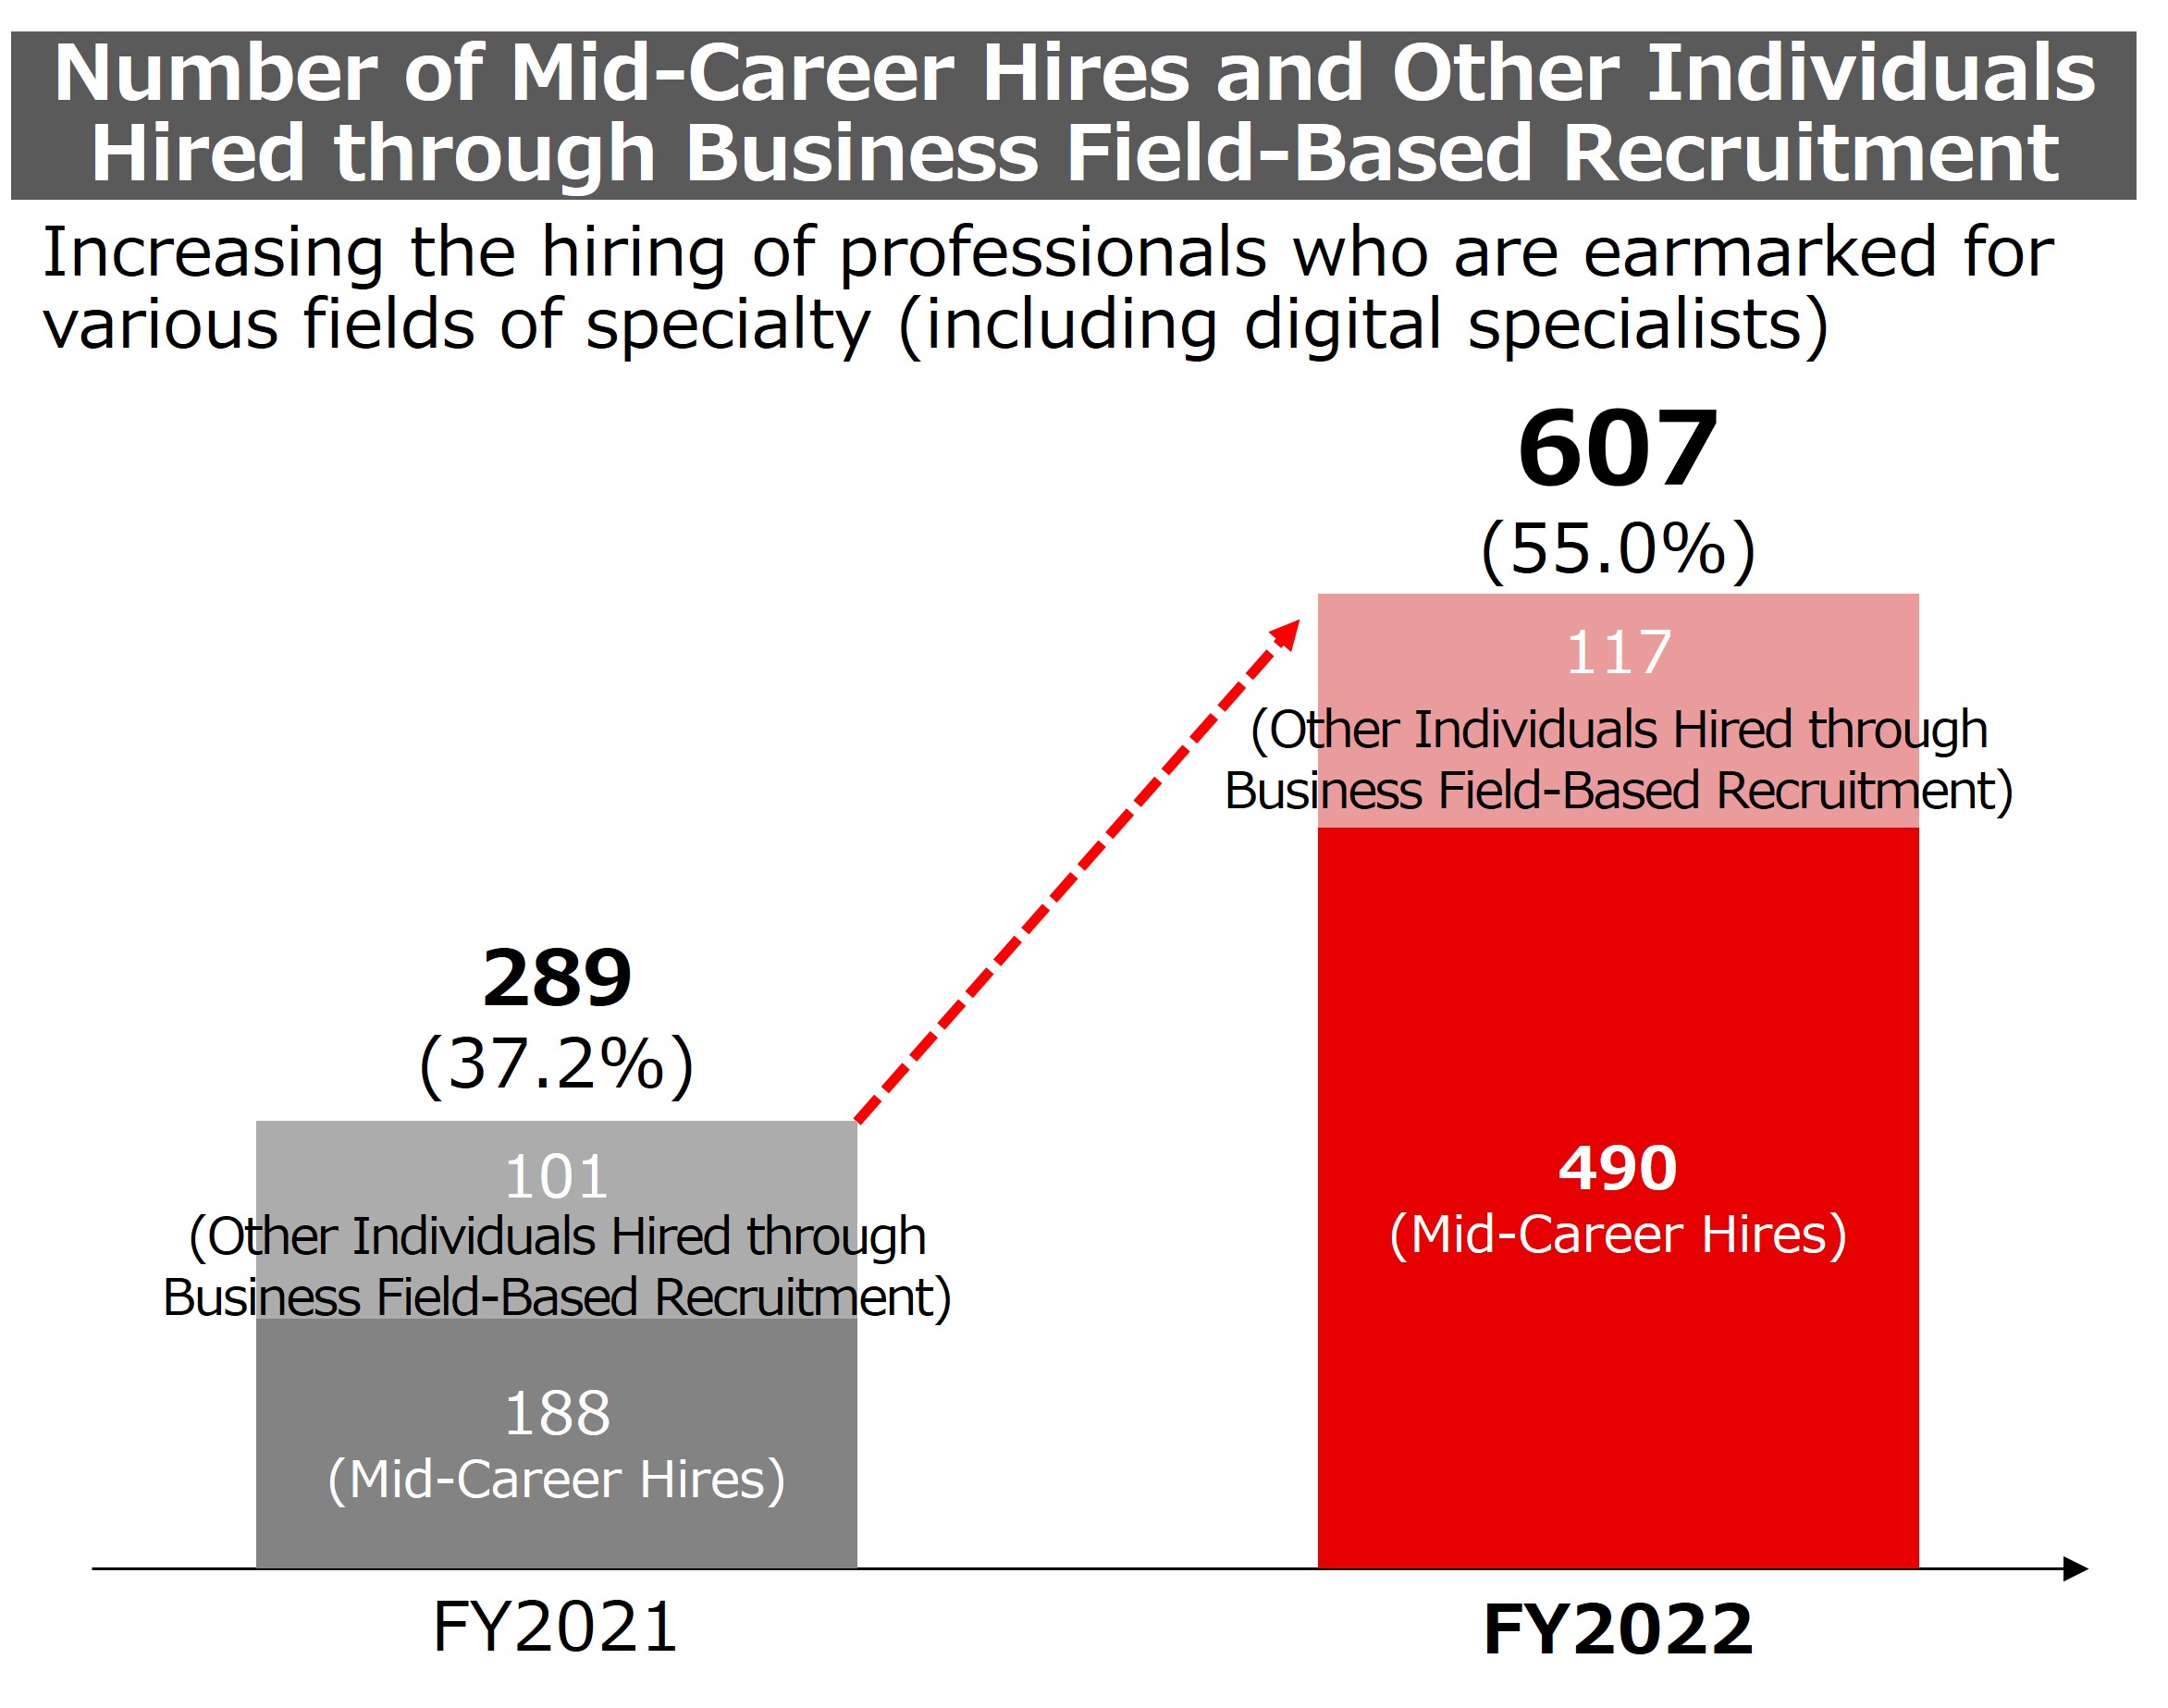 Number of Mid-Career Hires and Other Individuals Hired through Business Field-Based Recruitment